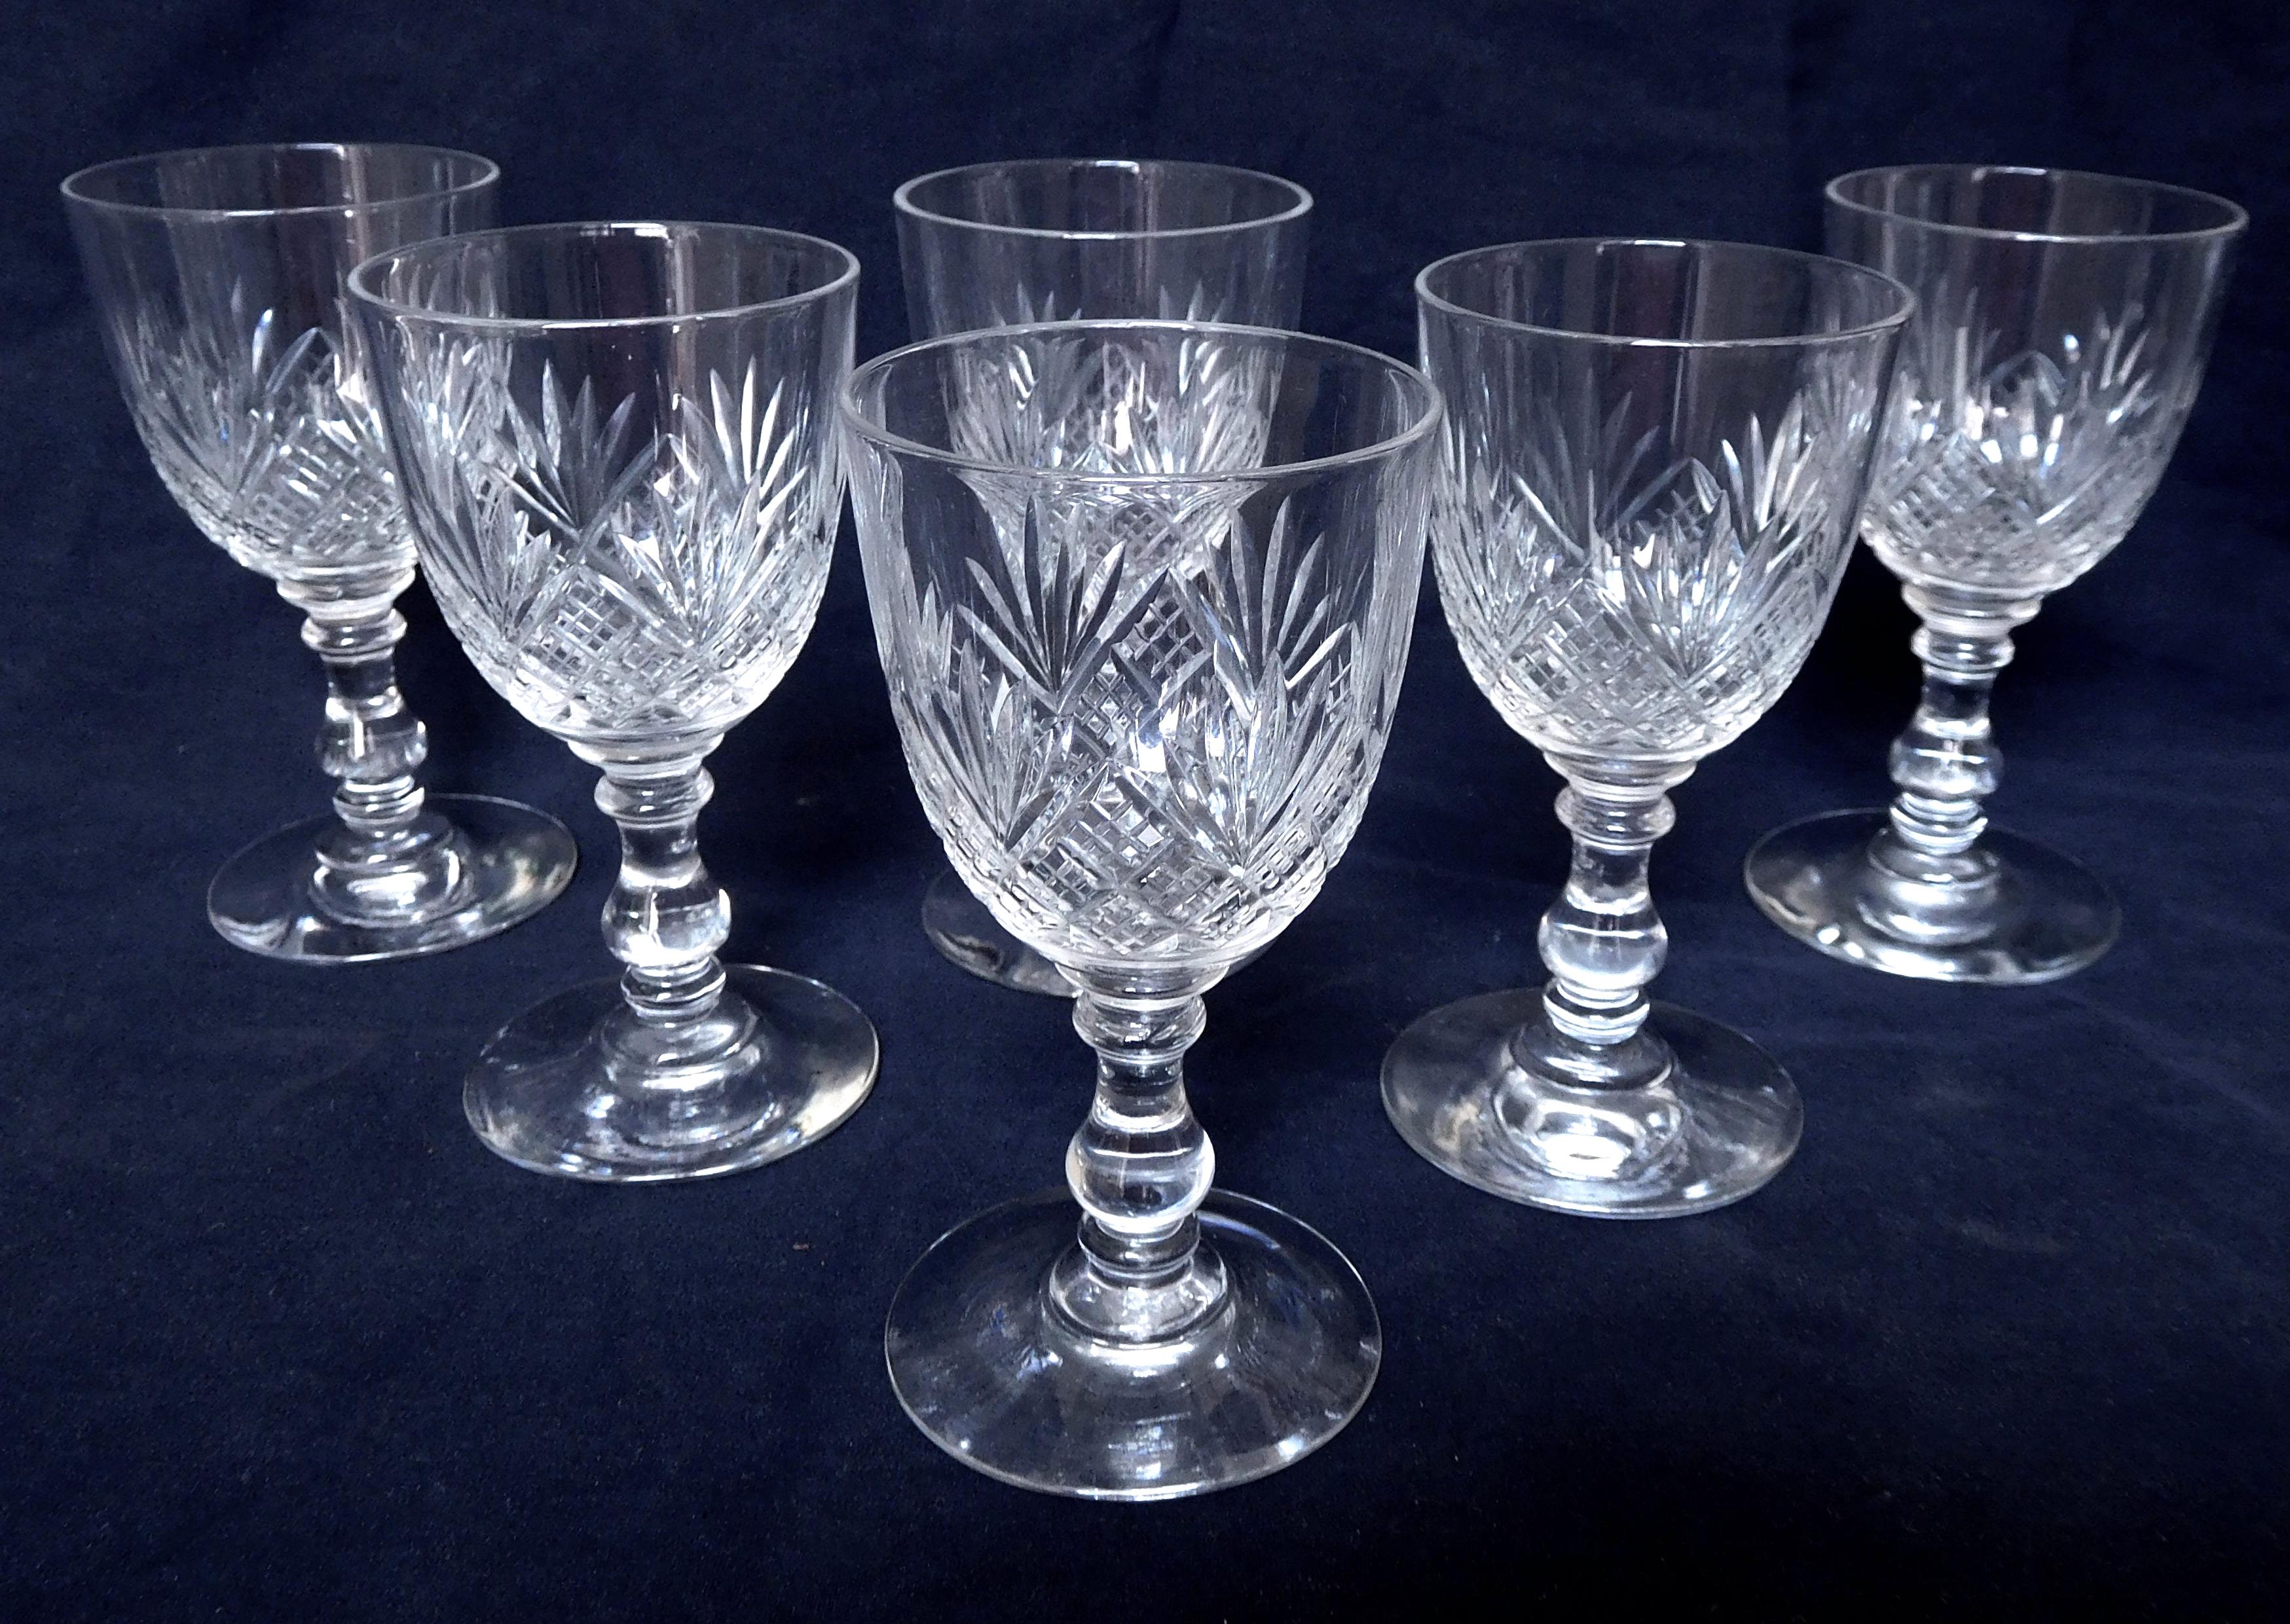 20th Century French antique set of 3 Baccarat crystal glasses - France - Douai model For Sale